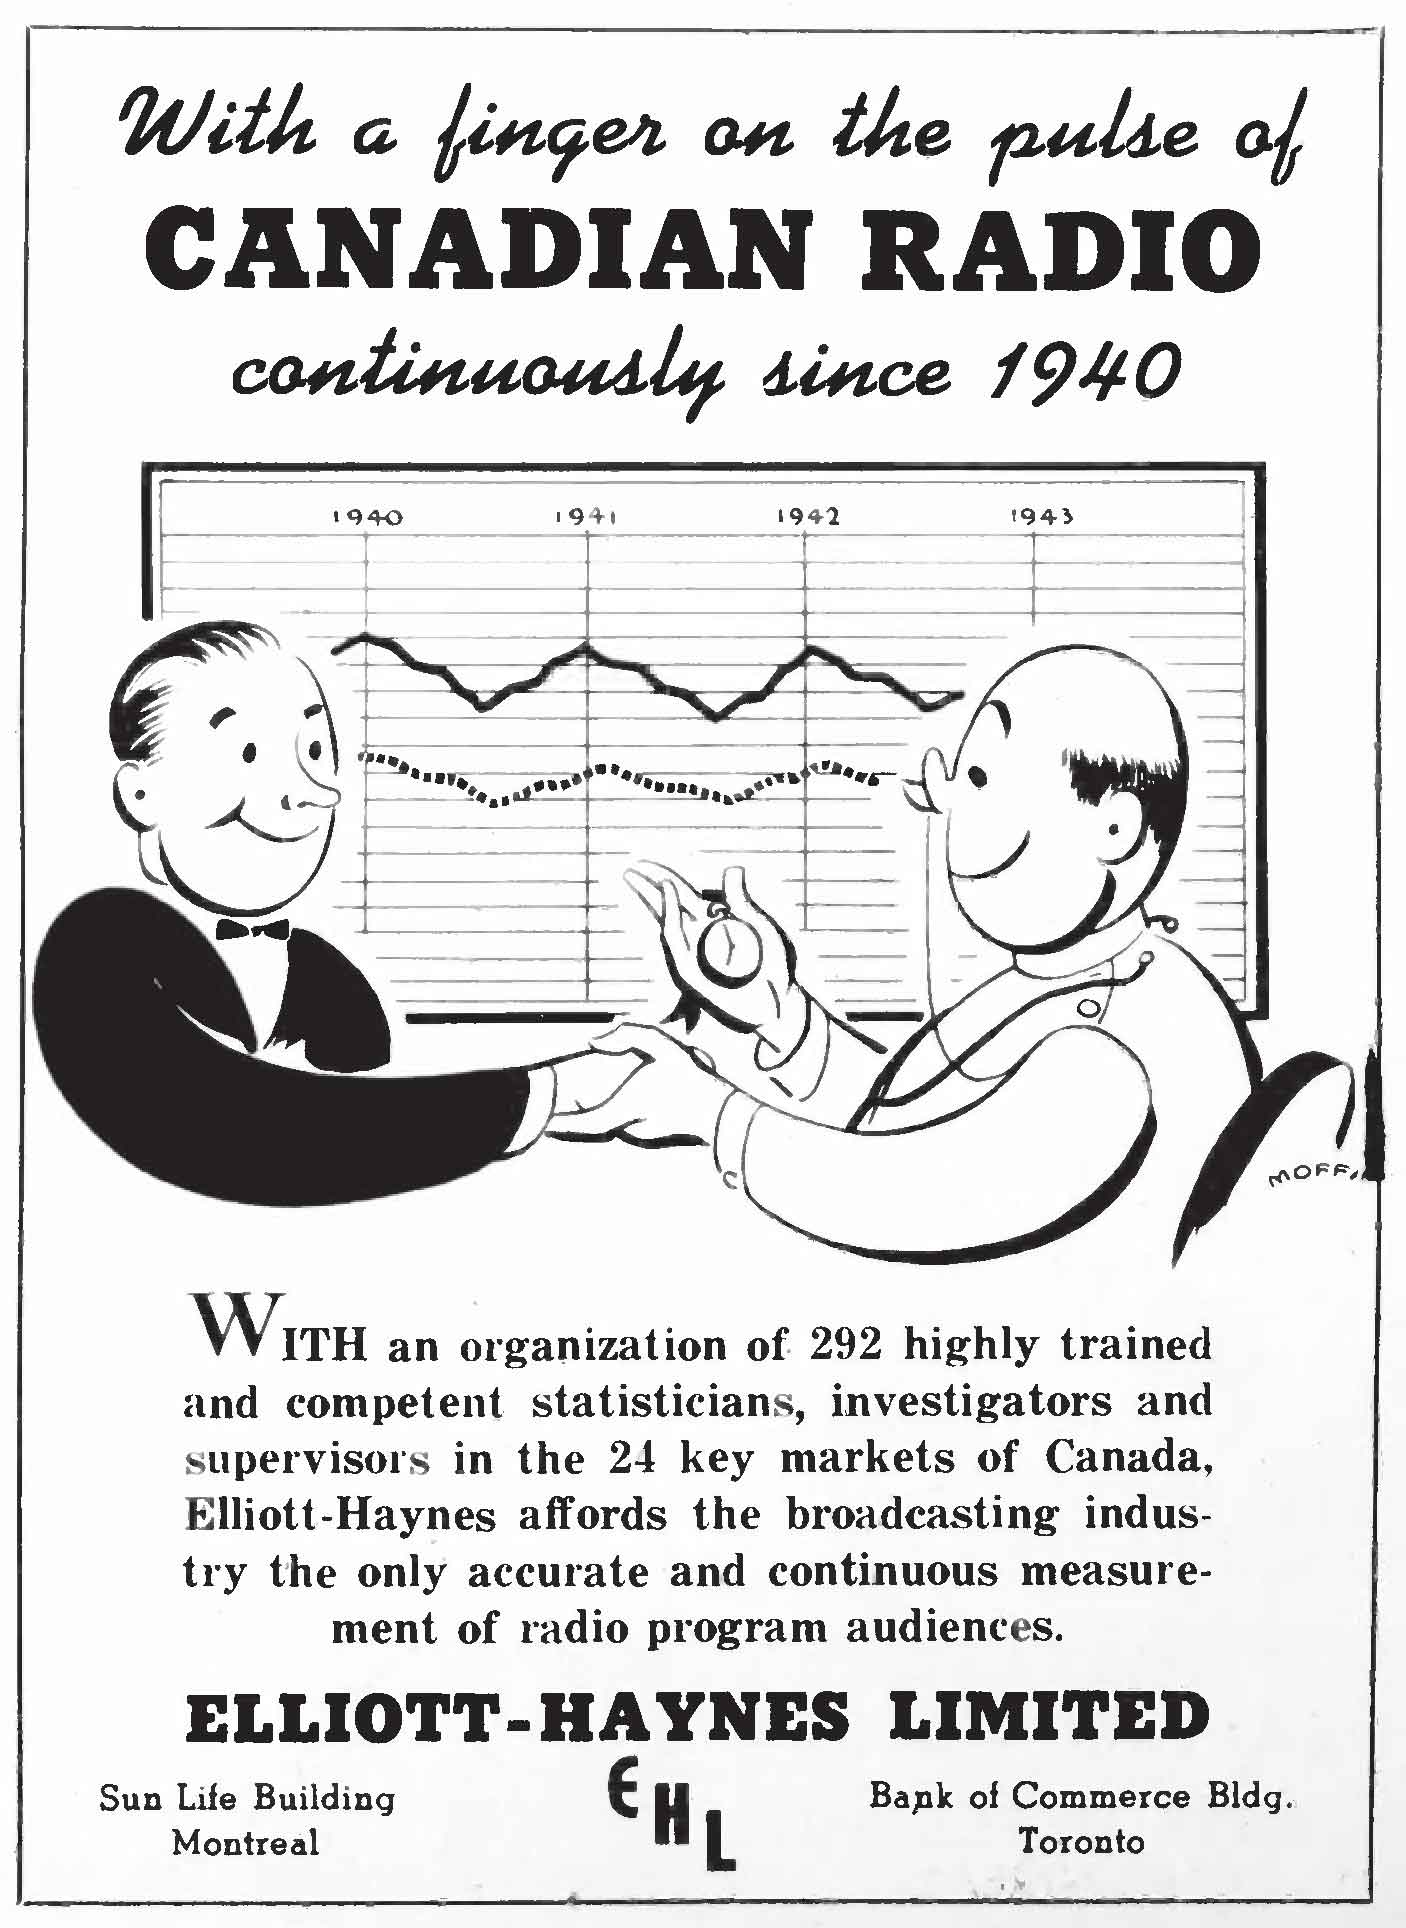 Old paper ad with drawing of two men shaking hands in front of a line graph with dates,says With a finger on the pulse of CANADIAN RADIO continuously since 1940.